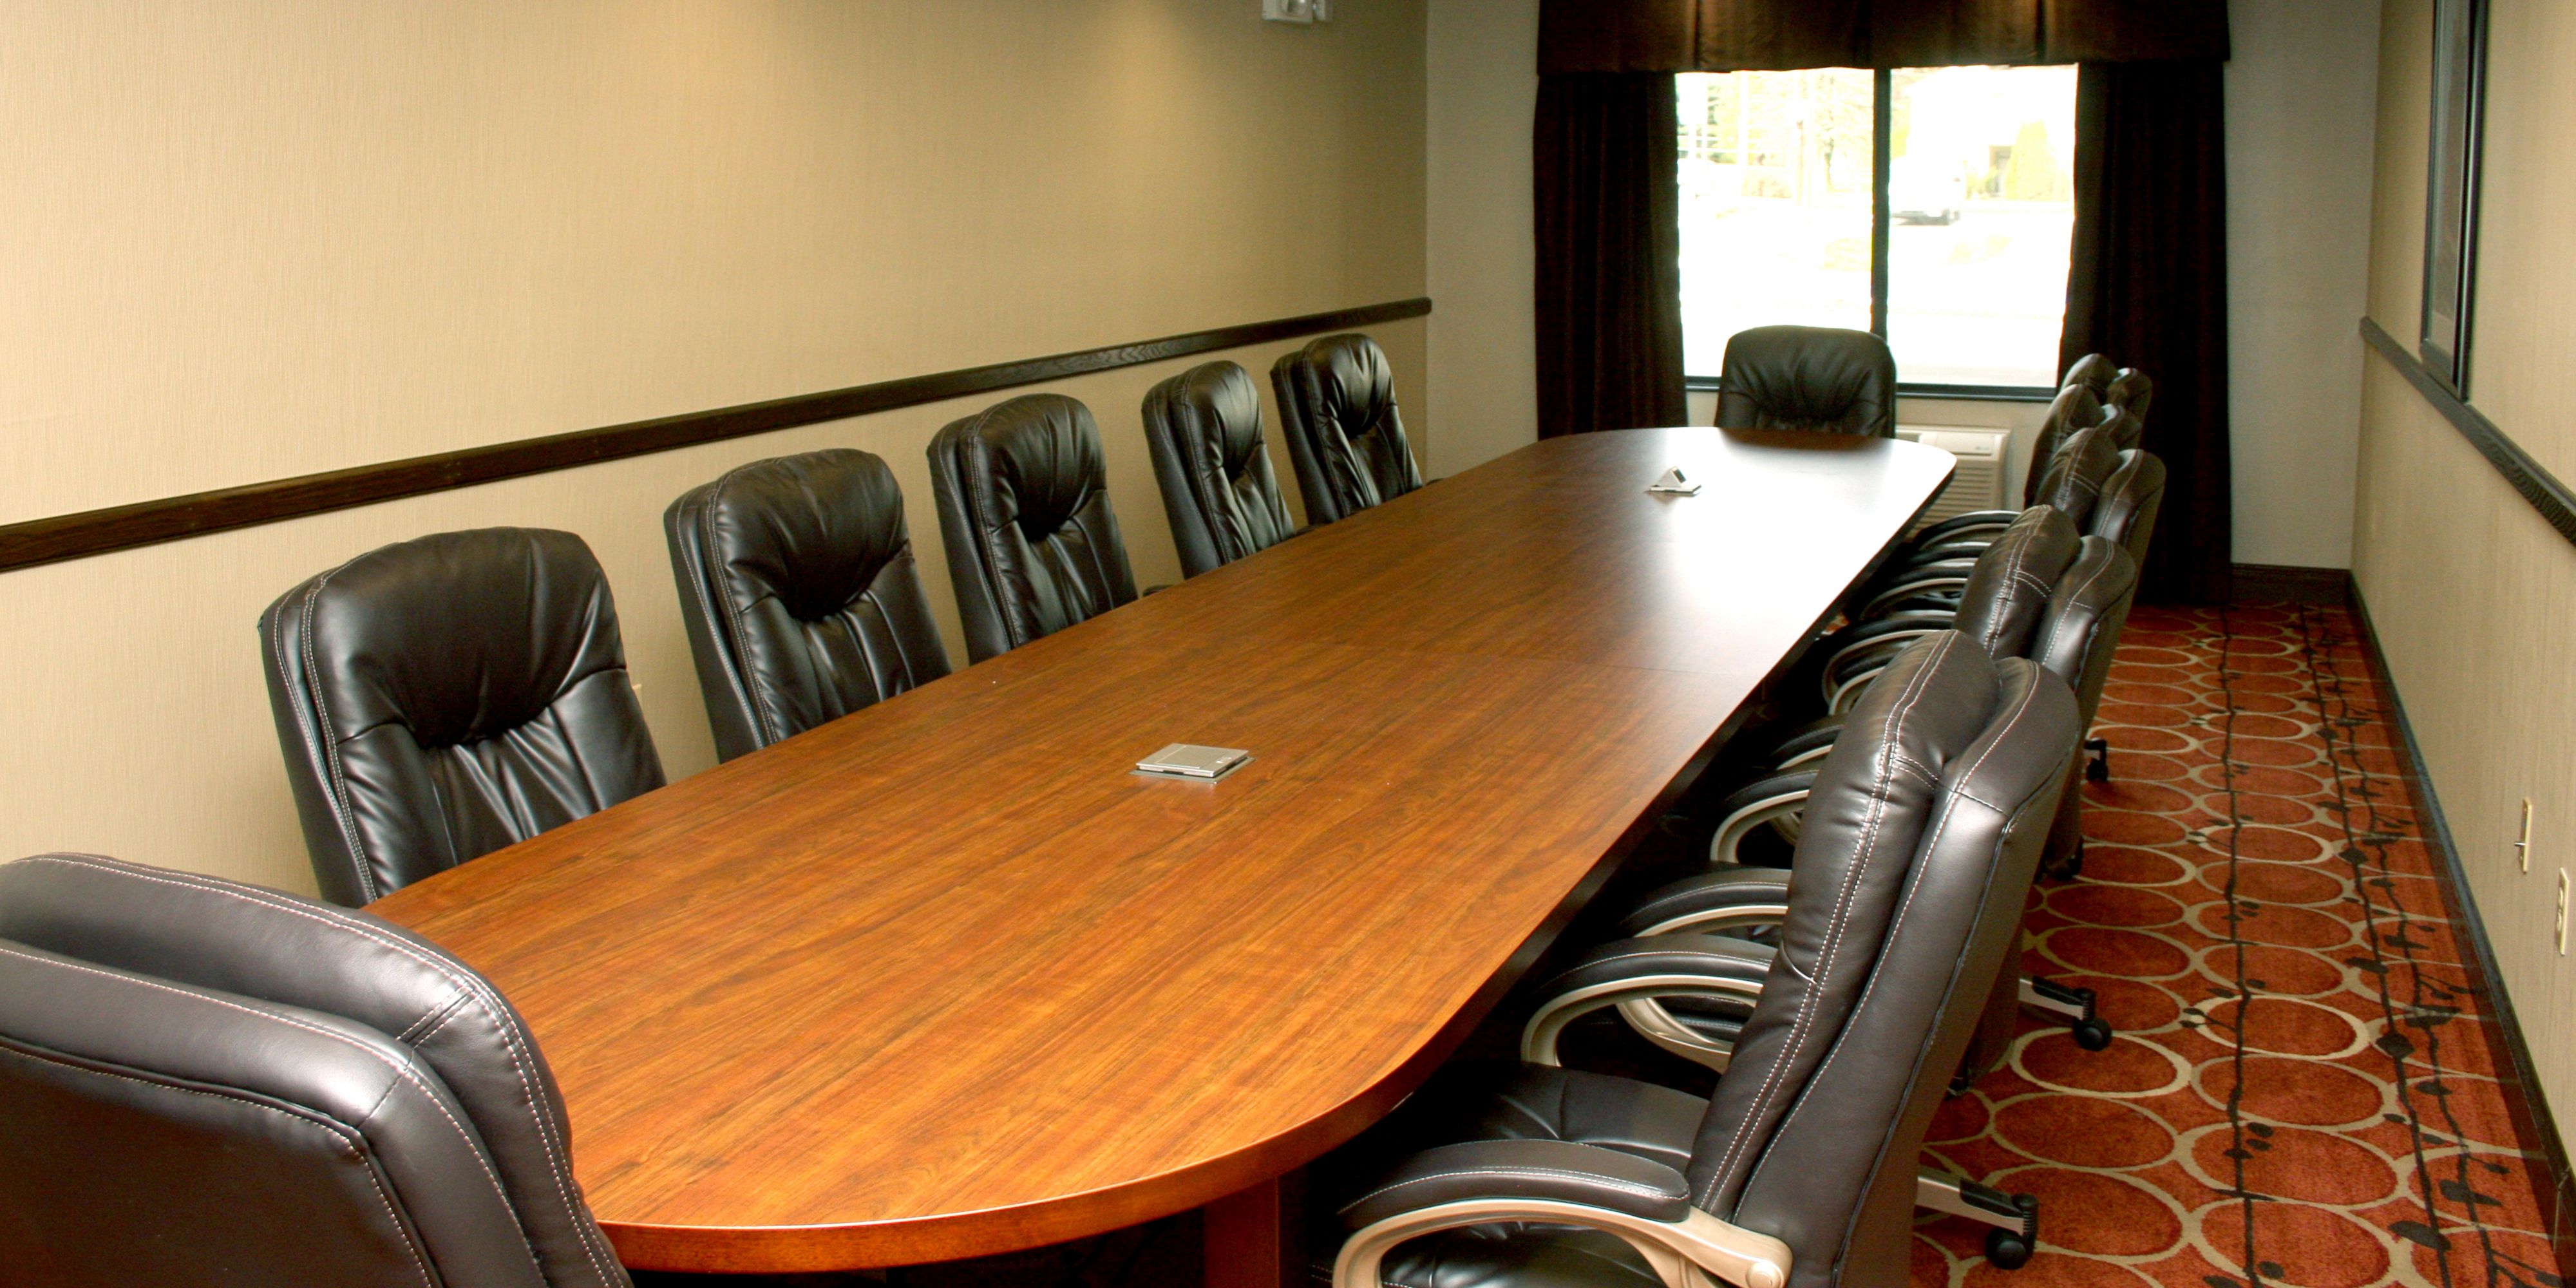 Host your meetings and events at our Cumberland Hotel, featuring 350 sq. ft. of space equipped with cutting-edge technology, making it the perfect venue for business meetings, conferences, social gatherings, and seminars of up to 100 guests. Let our dedicated team ensure your event is a seamless success.